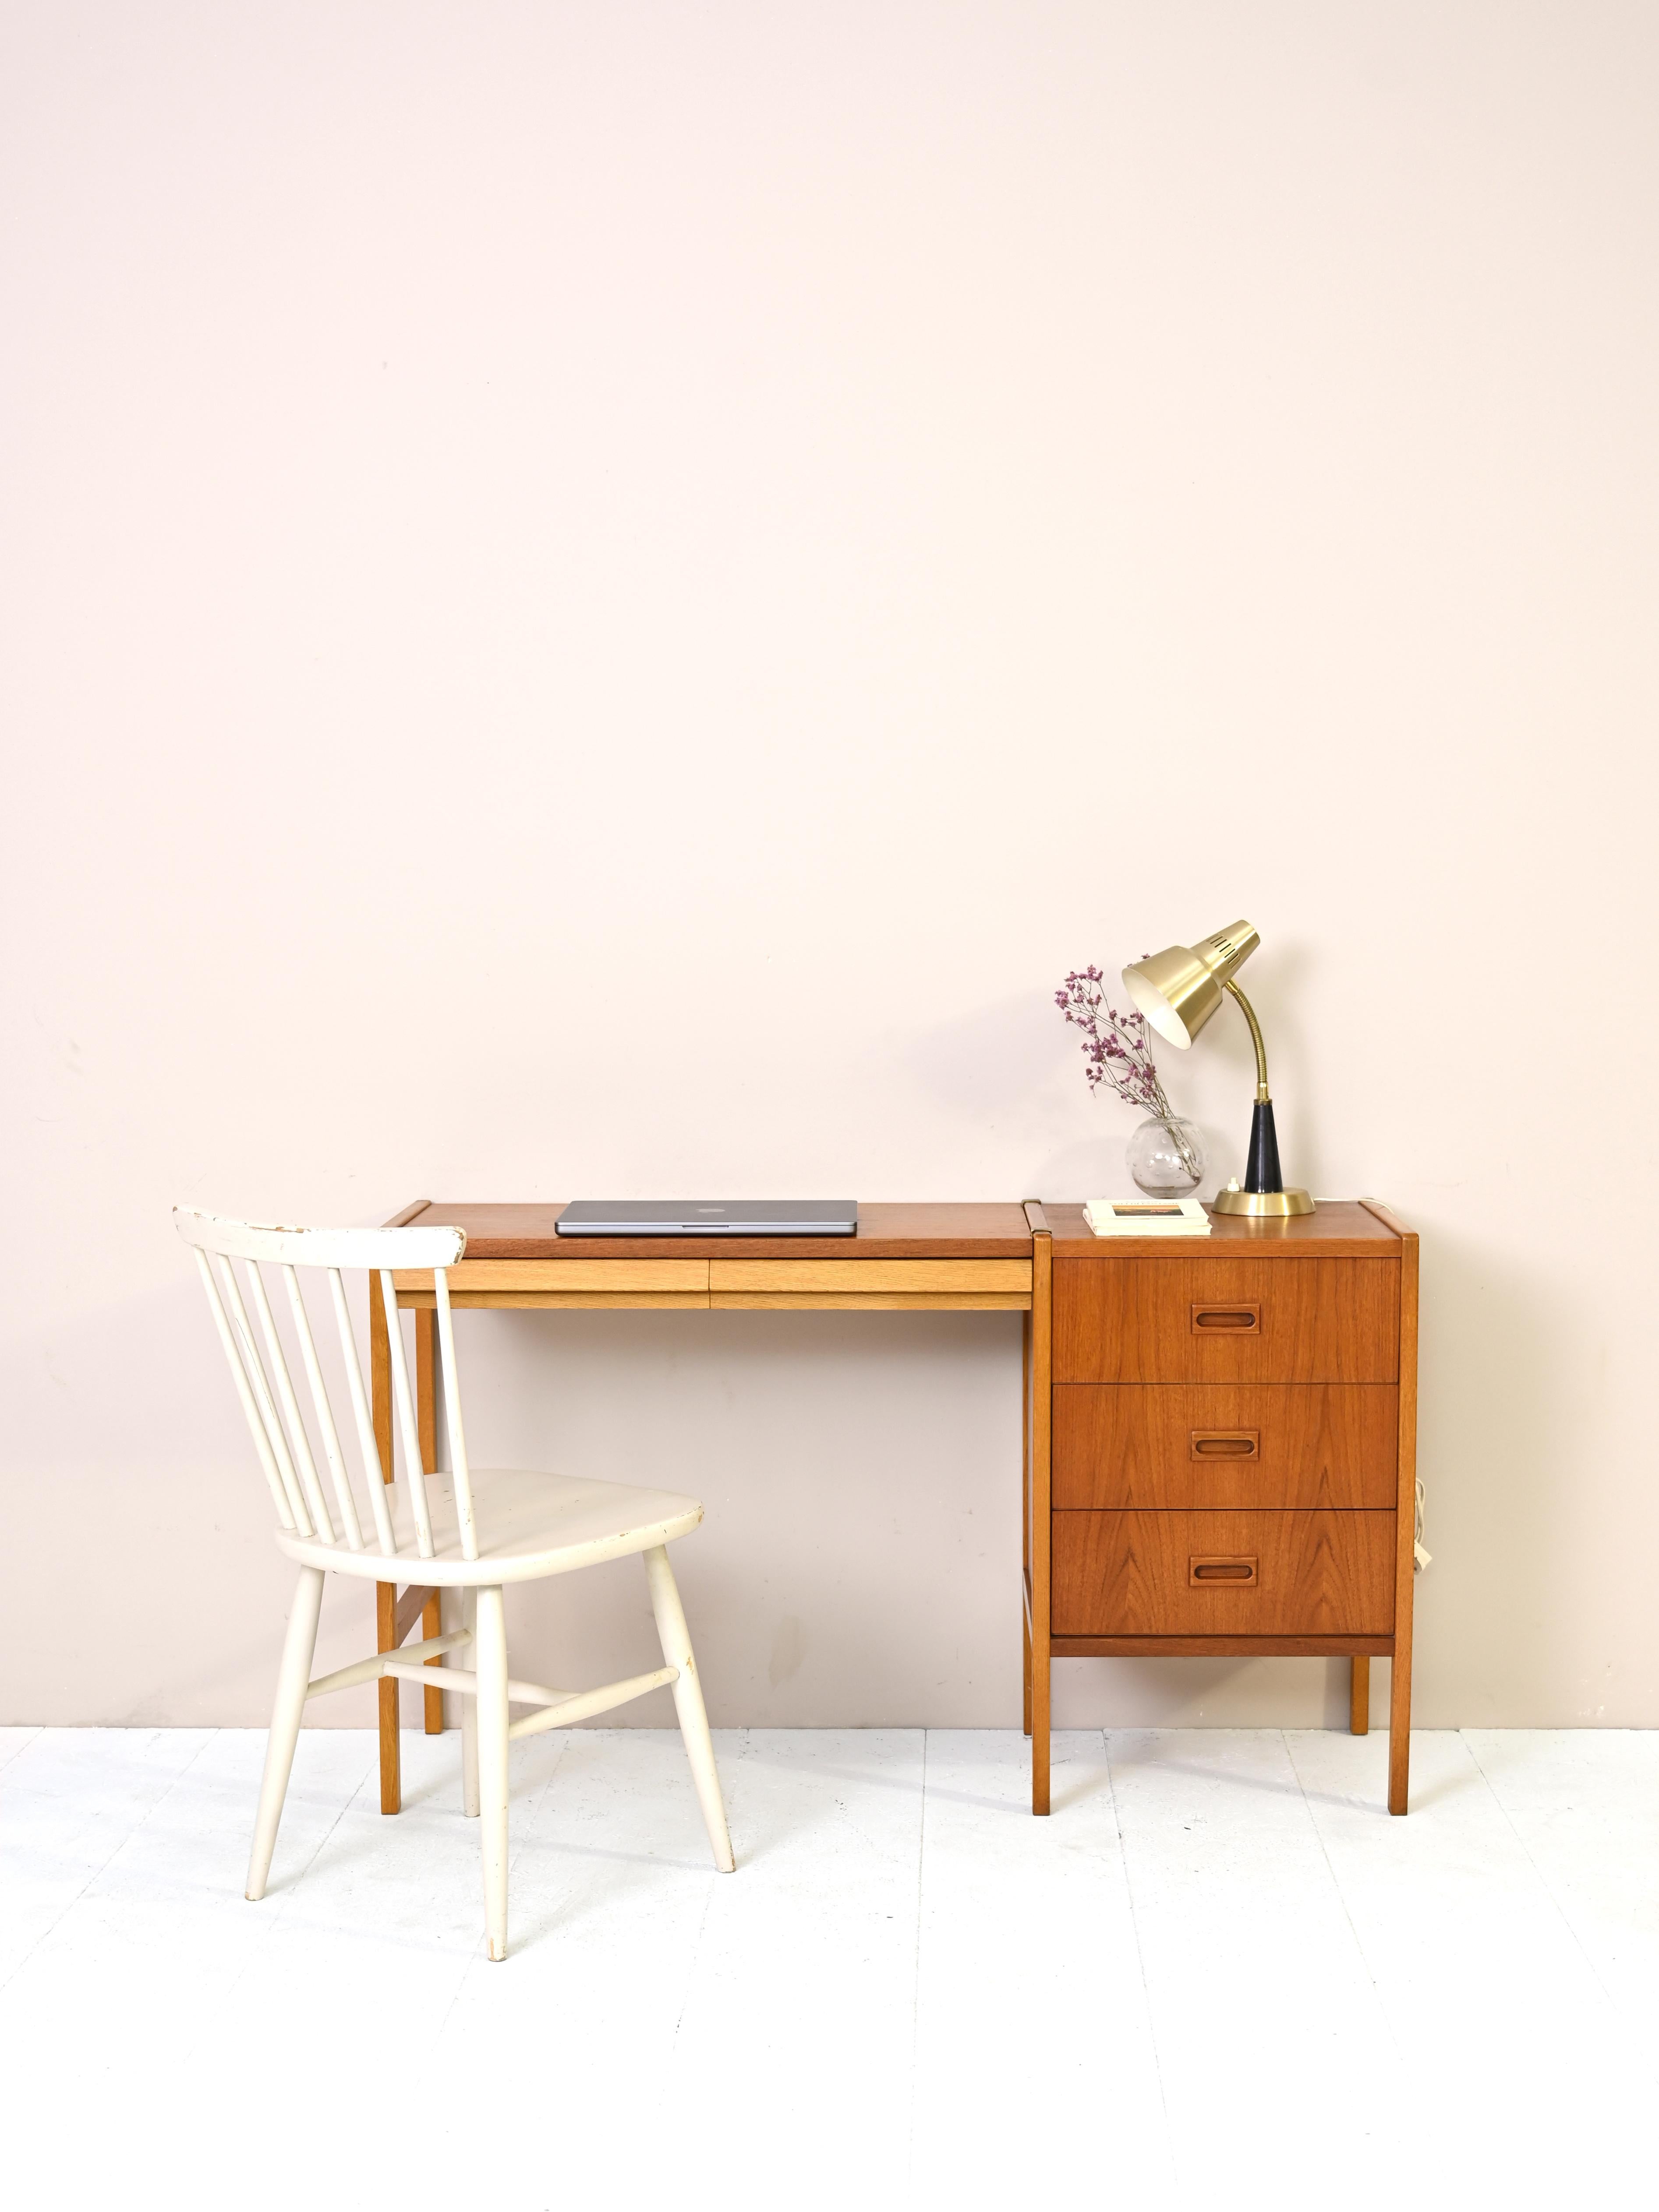 Particular desk designed by Fridhagen in 1959.
Consists of a chest of drawers with three drawers on which the top interlocking rests.
Beautiful and functional, On the one hand the capacious drawers provide storage space and
on the other side the